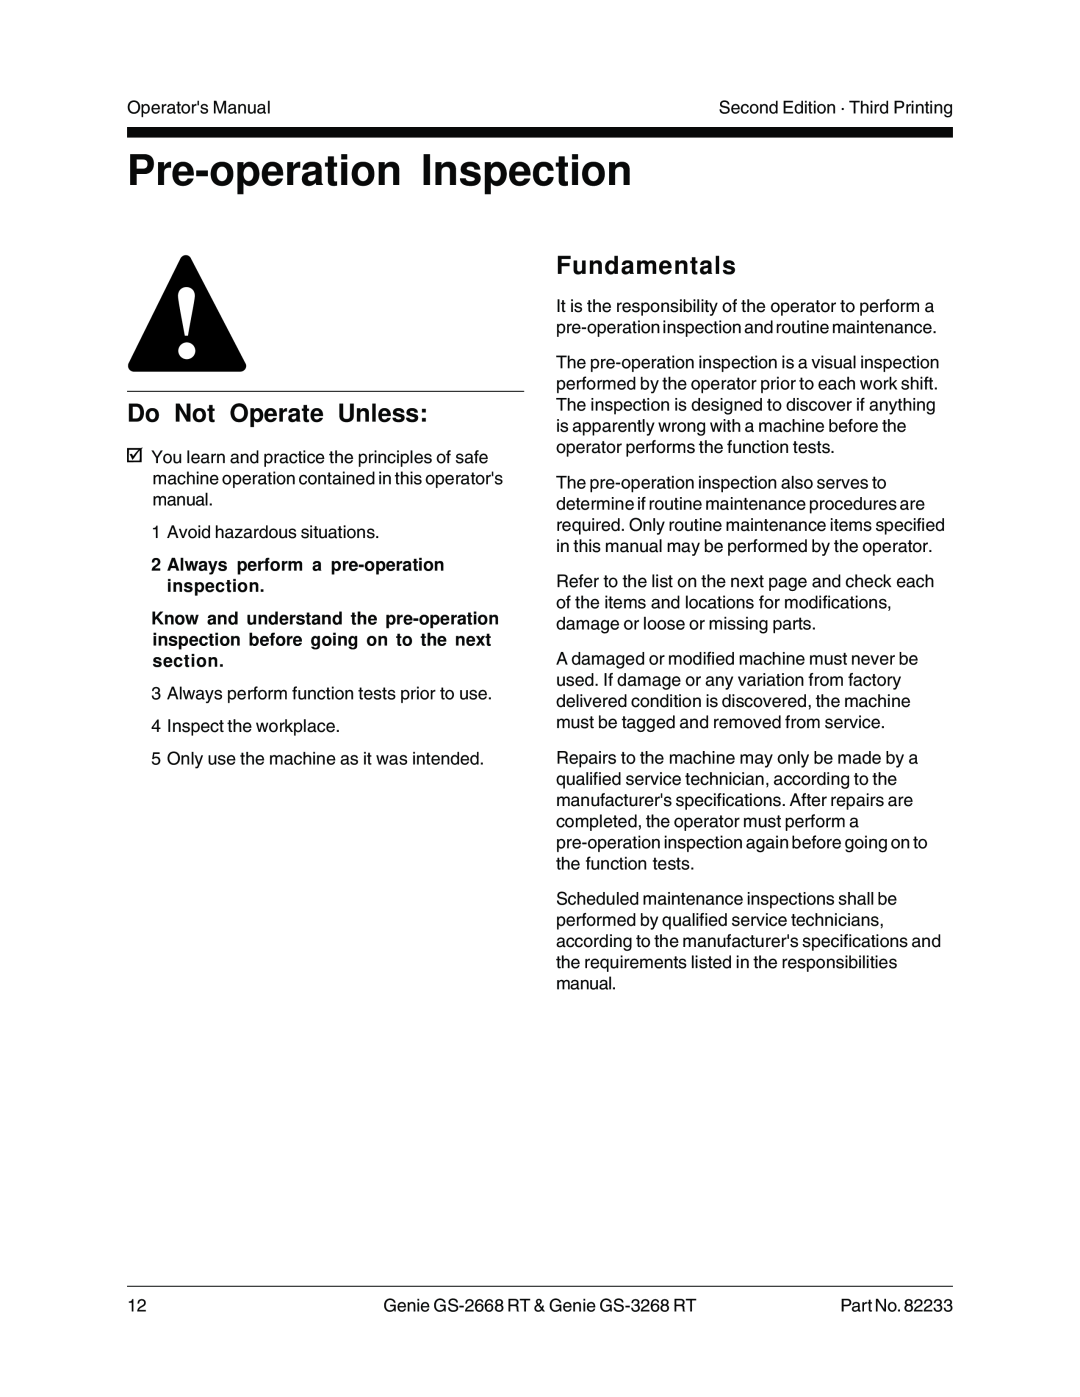 Genie GS-2668 RT Pre-operation Inspection, Fundamentals, Always perform a pre-operation inspection, Do Not Operate Unless 